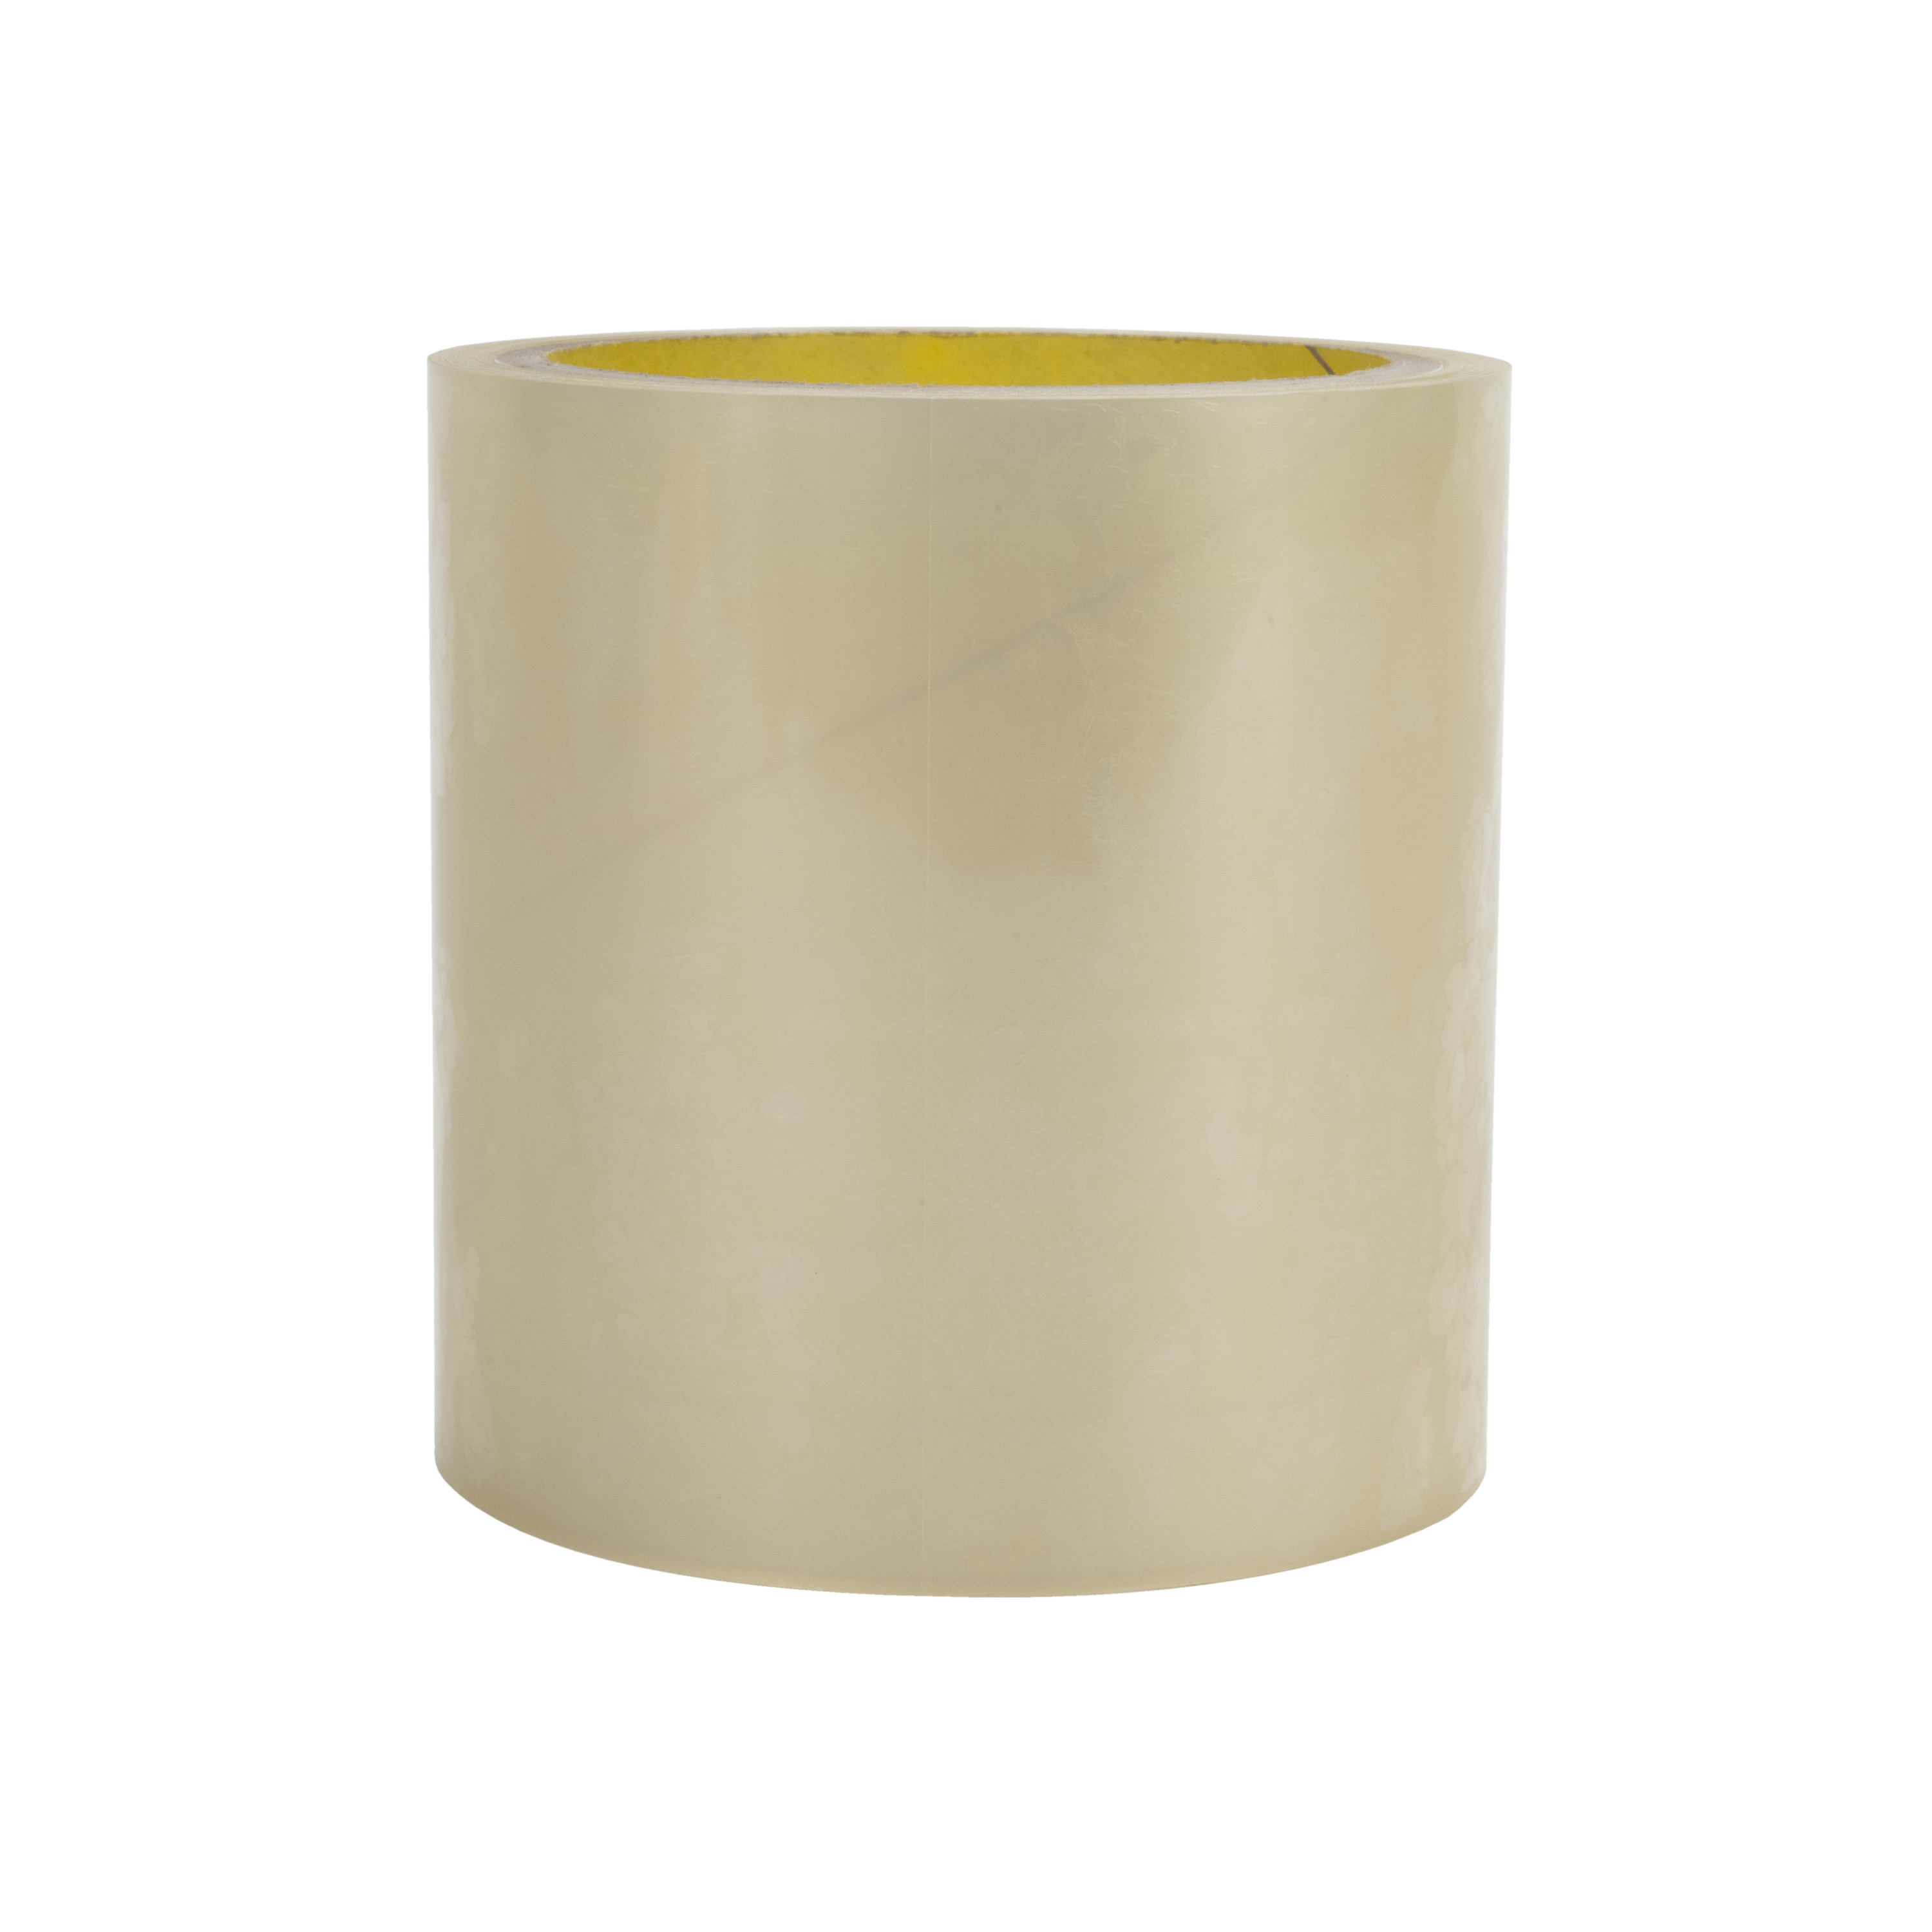 3M™ Adhesive Transfer Tape 468MPF, Clear, 5 mil, Roll, Config